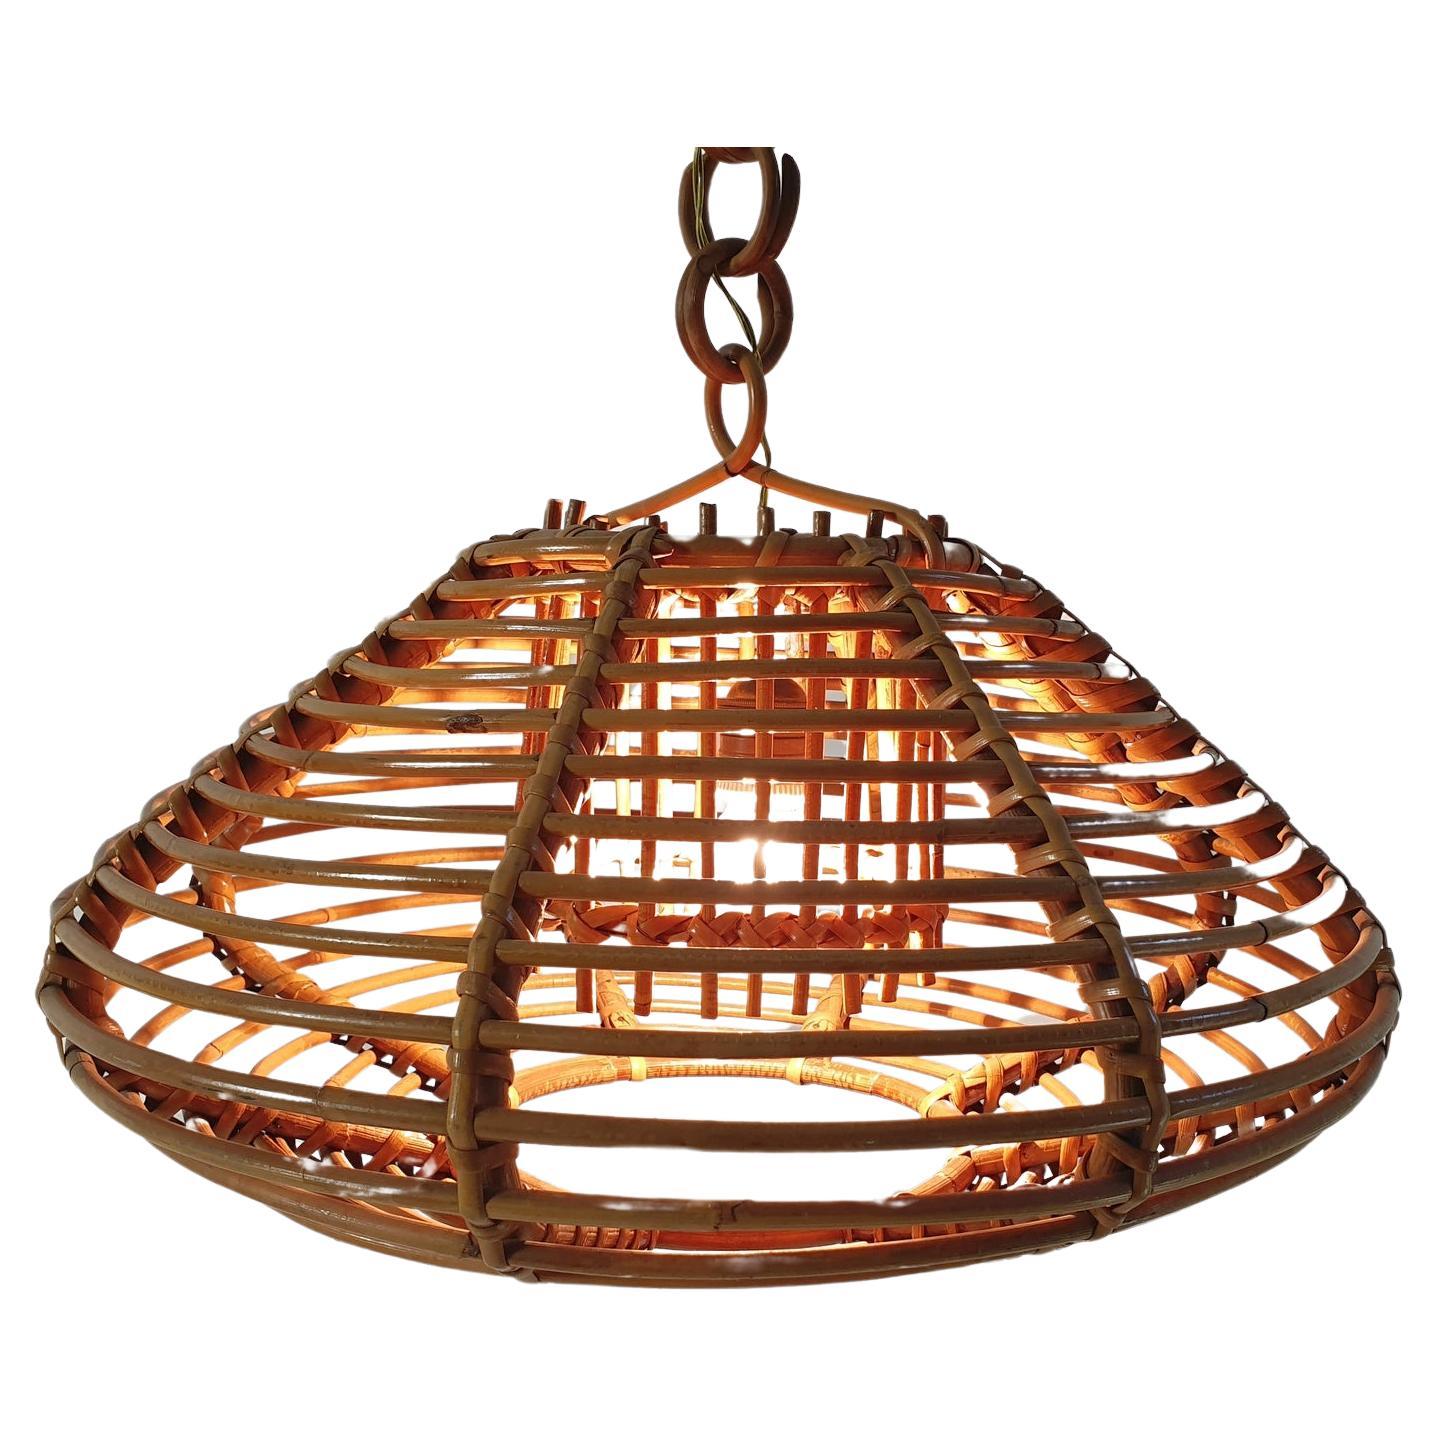 Midcentury Italian handmade rattan pendant in very nice original condition without damages and in very nice condition. Lightsource can be altered depending on what one prefers of course.